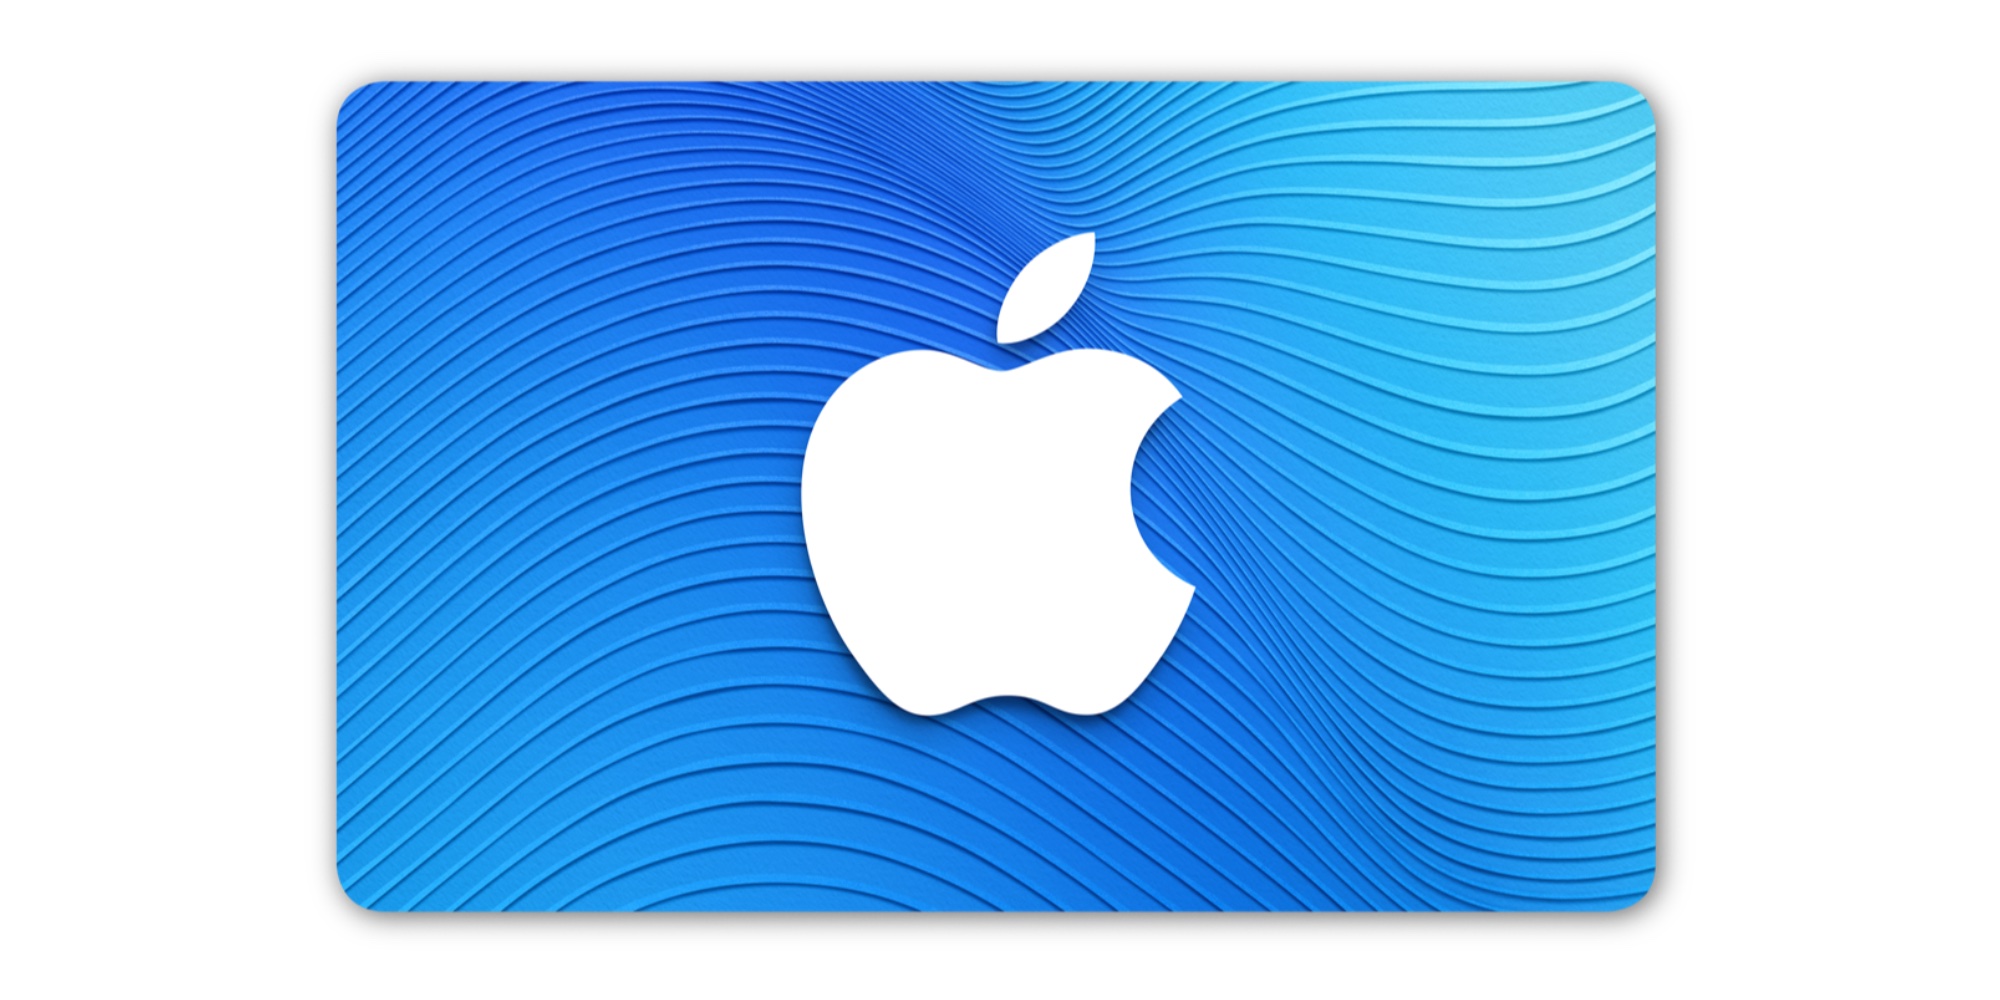 is offering $10 credit when you buy a $100 Apple gift card